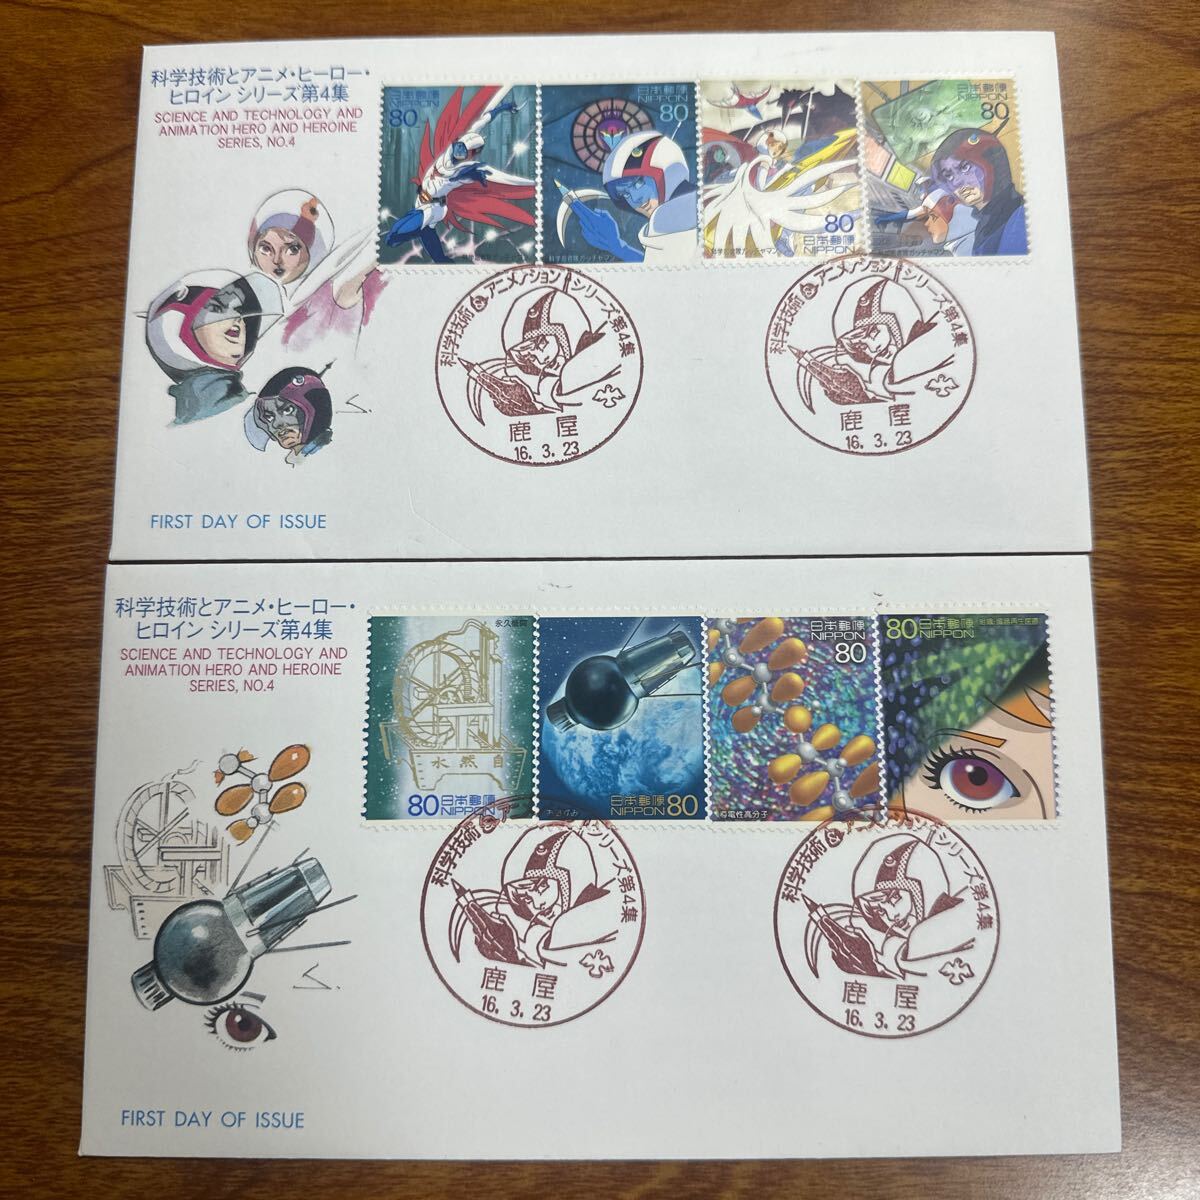  First Day Cover science technology . anime hero heroine series no. 4 compilation Heisei era 16 year issue memory seal 